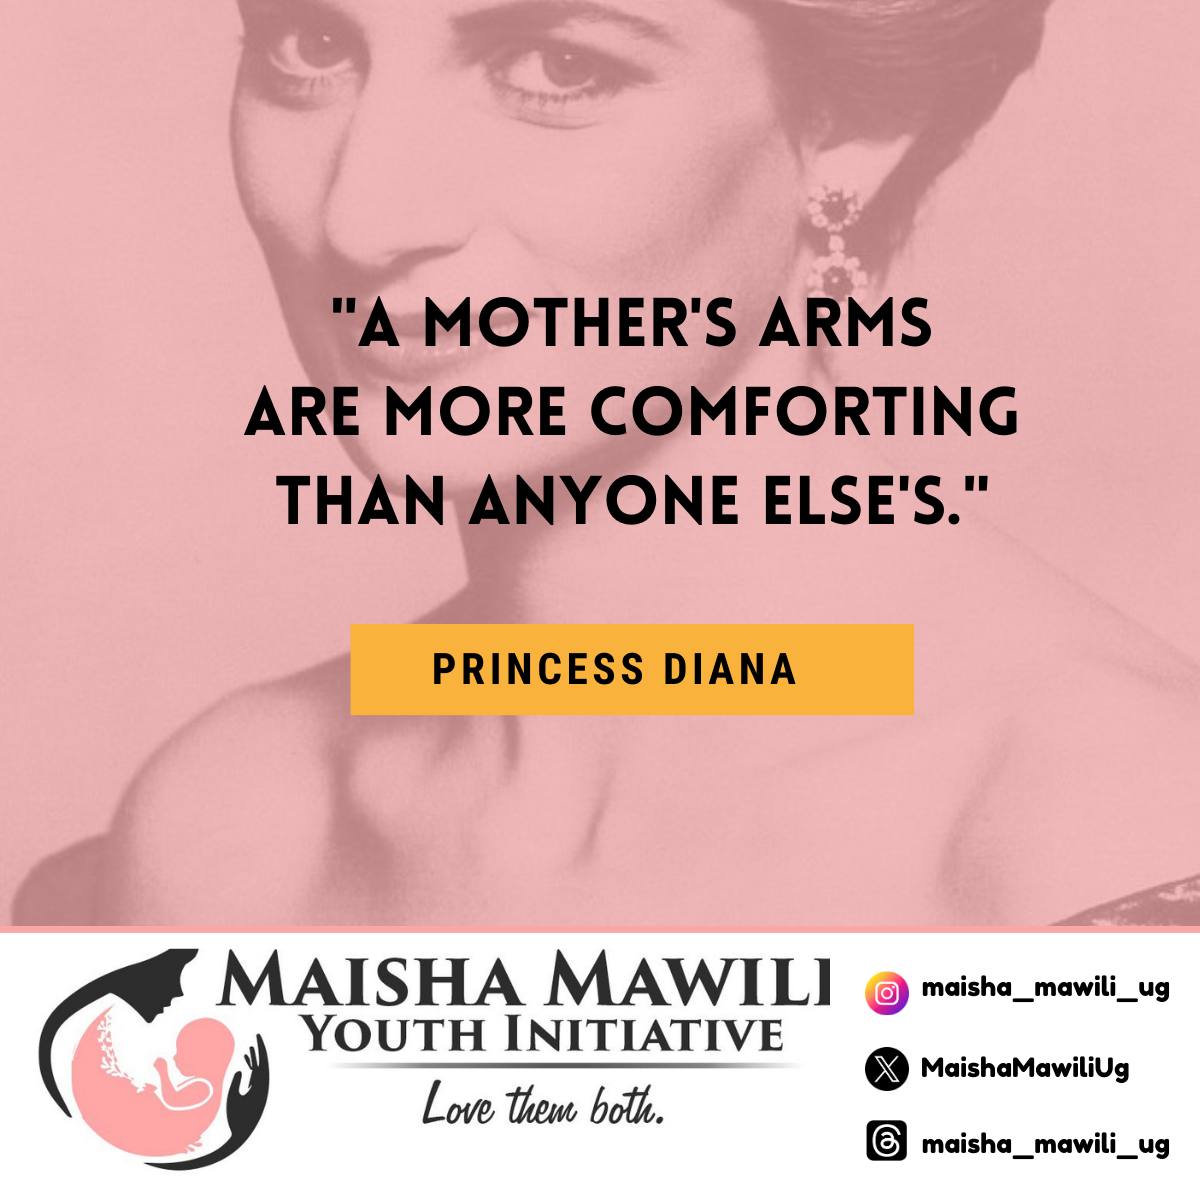 A mother's love is like a flower, it knows no boundaries and blooms in the most unexpected places. It's a place of warmth, peace and security. #MotherlyLove #UnconditionalLove #MaishaMawili